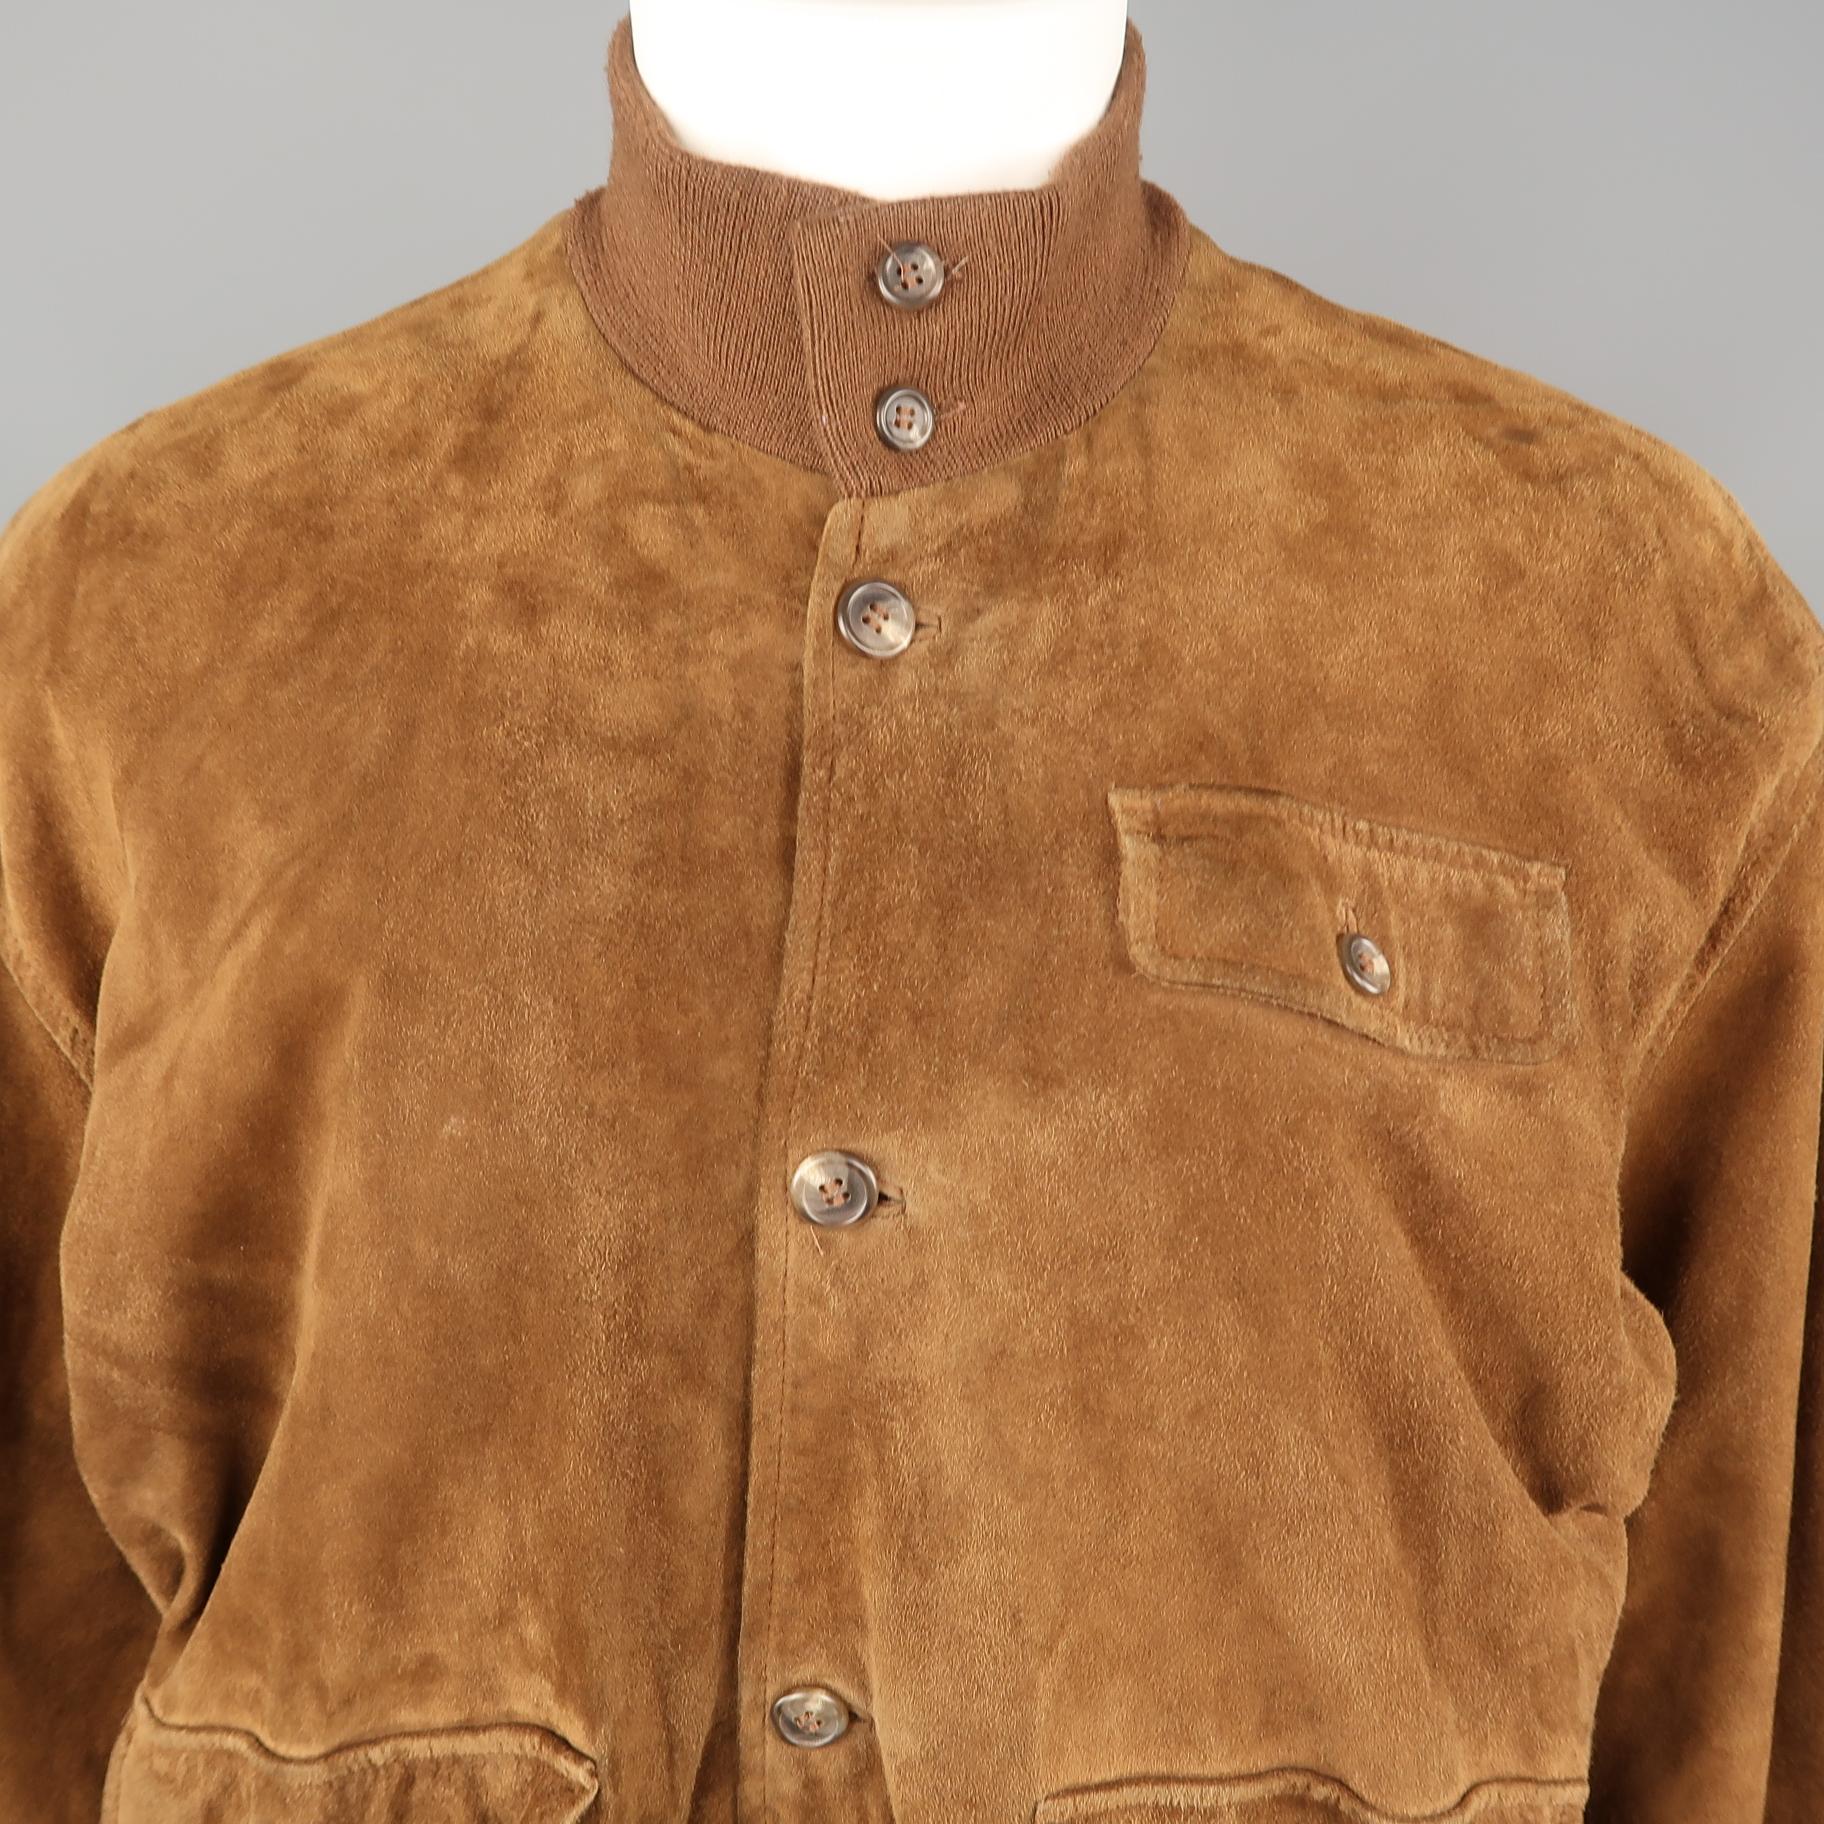 POLO RALPH LAUREN bomber jacket comes in soft brown suede with a knit high collar, patch flap pockets, and plaid liner. 
 
Good Vintage Pre-Owned Condition. Wear throughout and hole in back. As-is.
Marked: M
 
Measurements:
 
Shoulder: 23 in.
Chest: